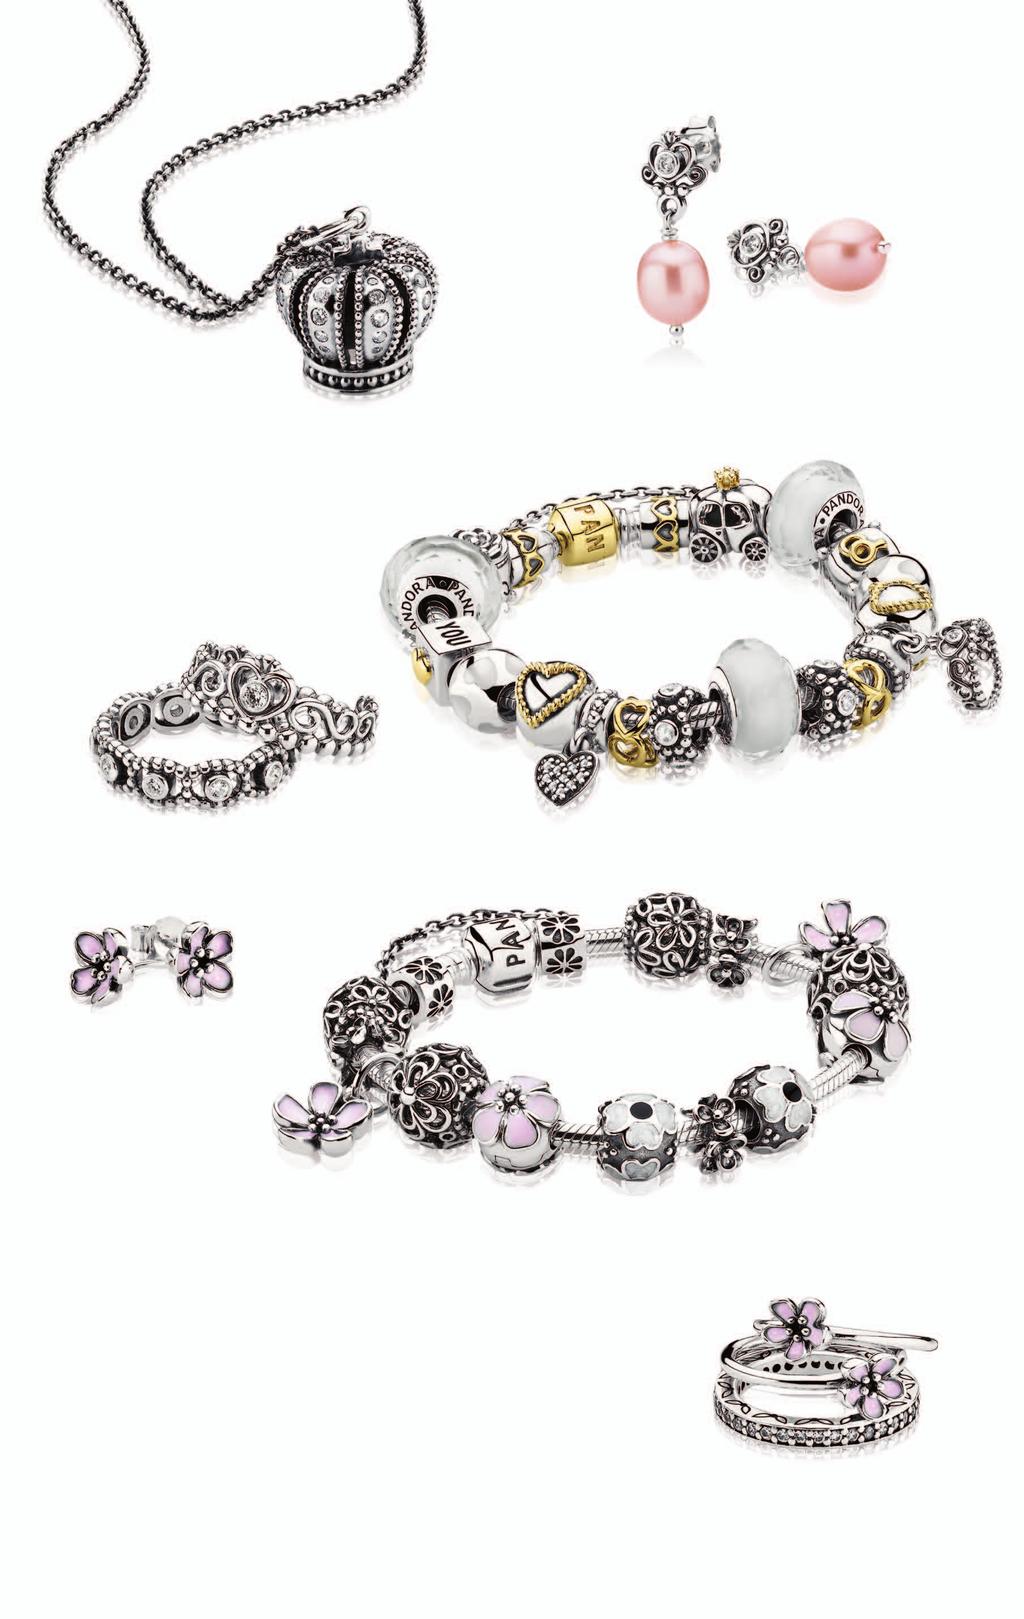 A A. Royal crown pendant, $110; oxidized chain, $95. My sweet princess, pearl earrings, $65. Pandora bracelet with featured charms starting at $45. Her majesty ring, $70. My princess ring, $45.